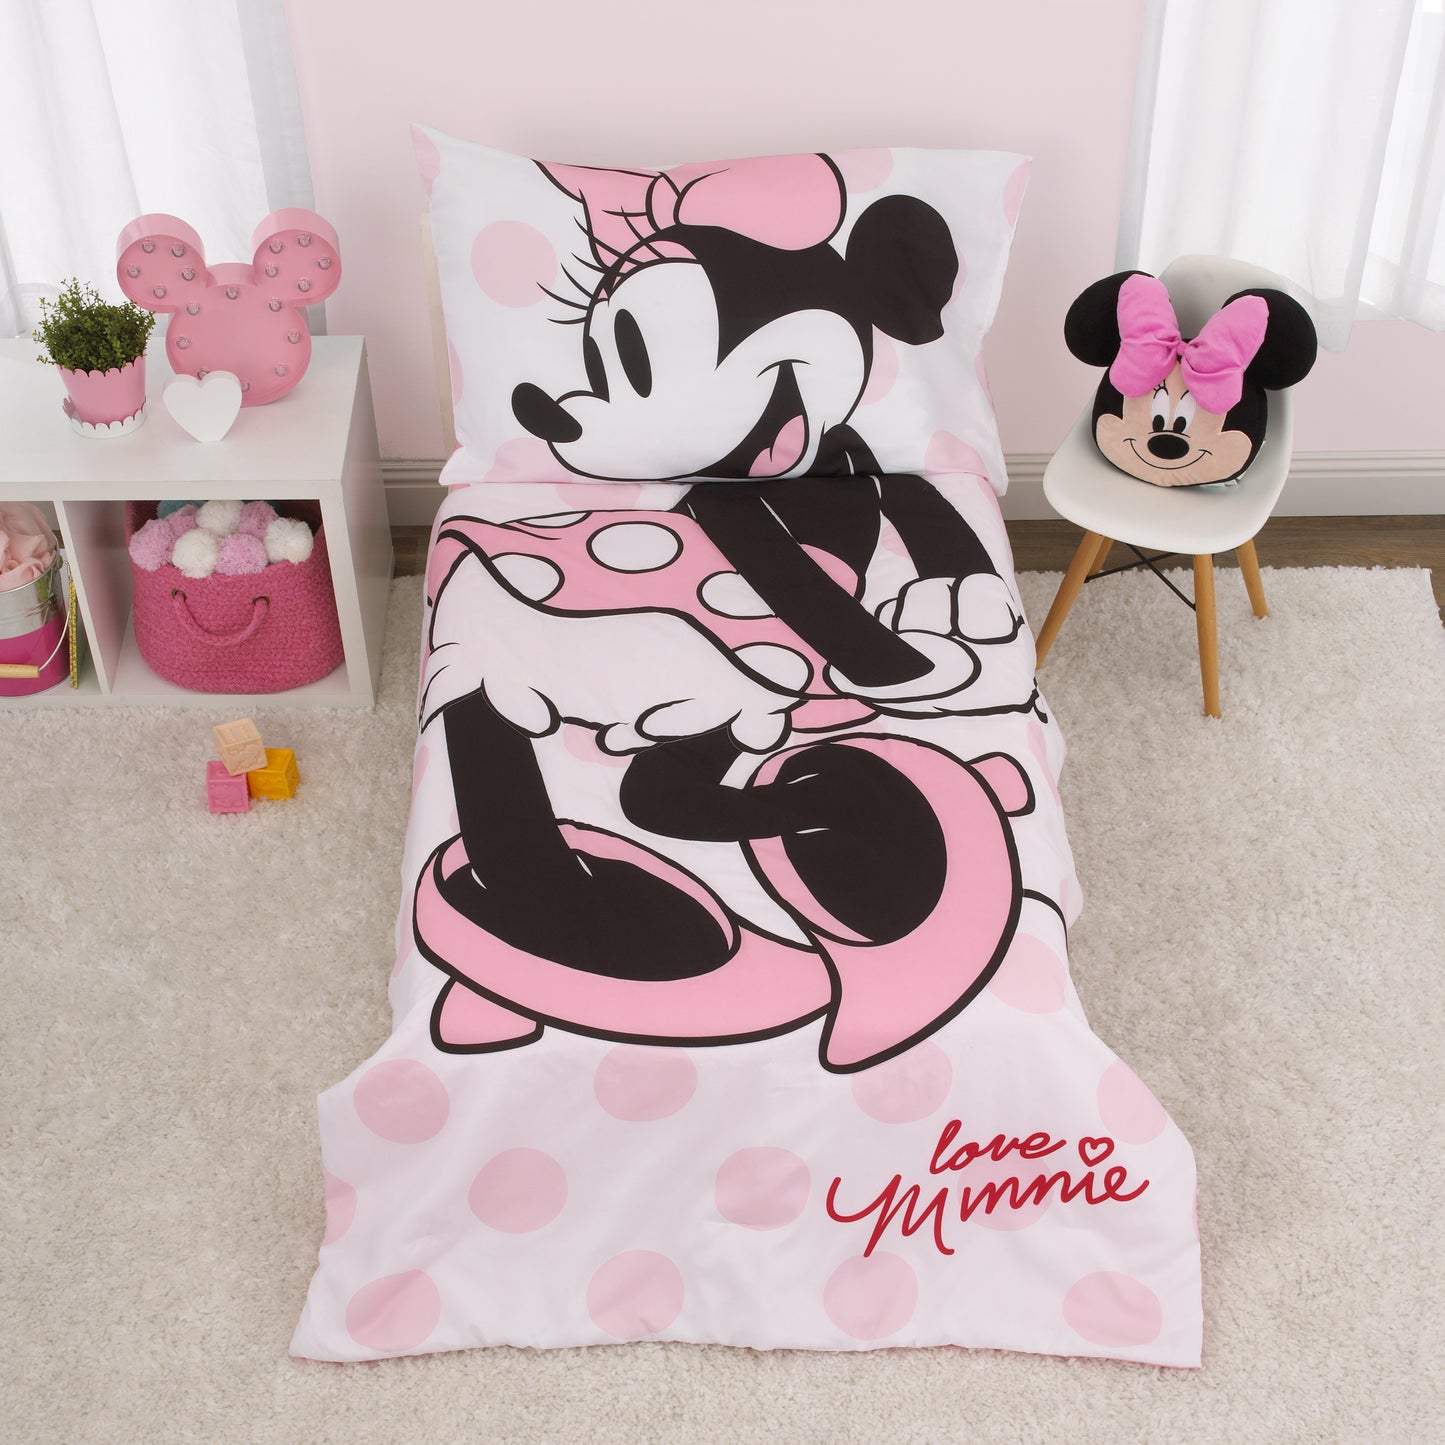 Disney Minnie Mouse - Pink, White and Black 4 Piece Toddler Bed Set with Comforter, Fitted Bottom Sheet, Flat Top Sheet and Standard Size Pillowcase